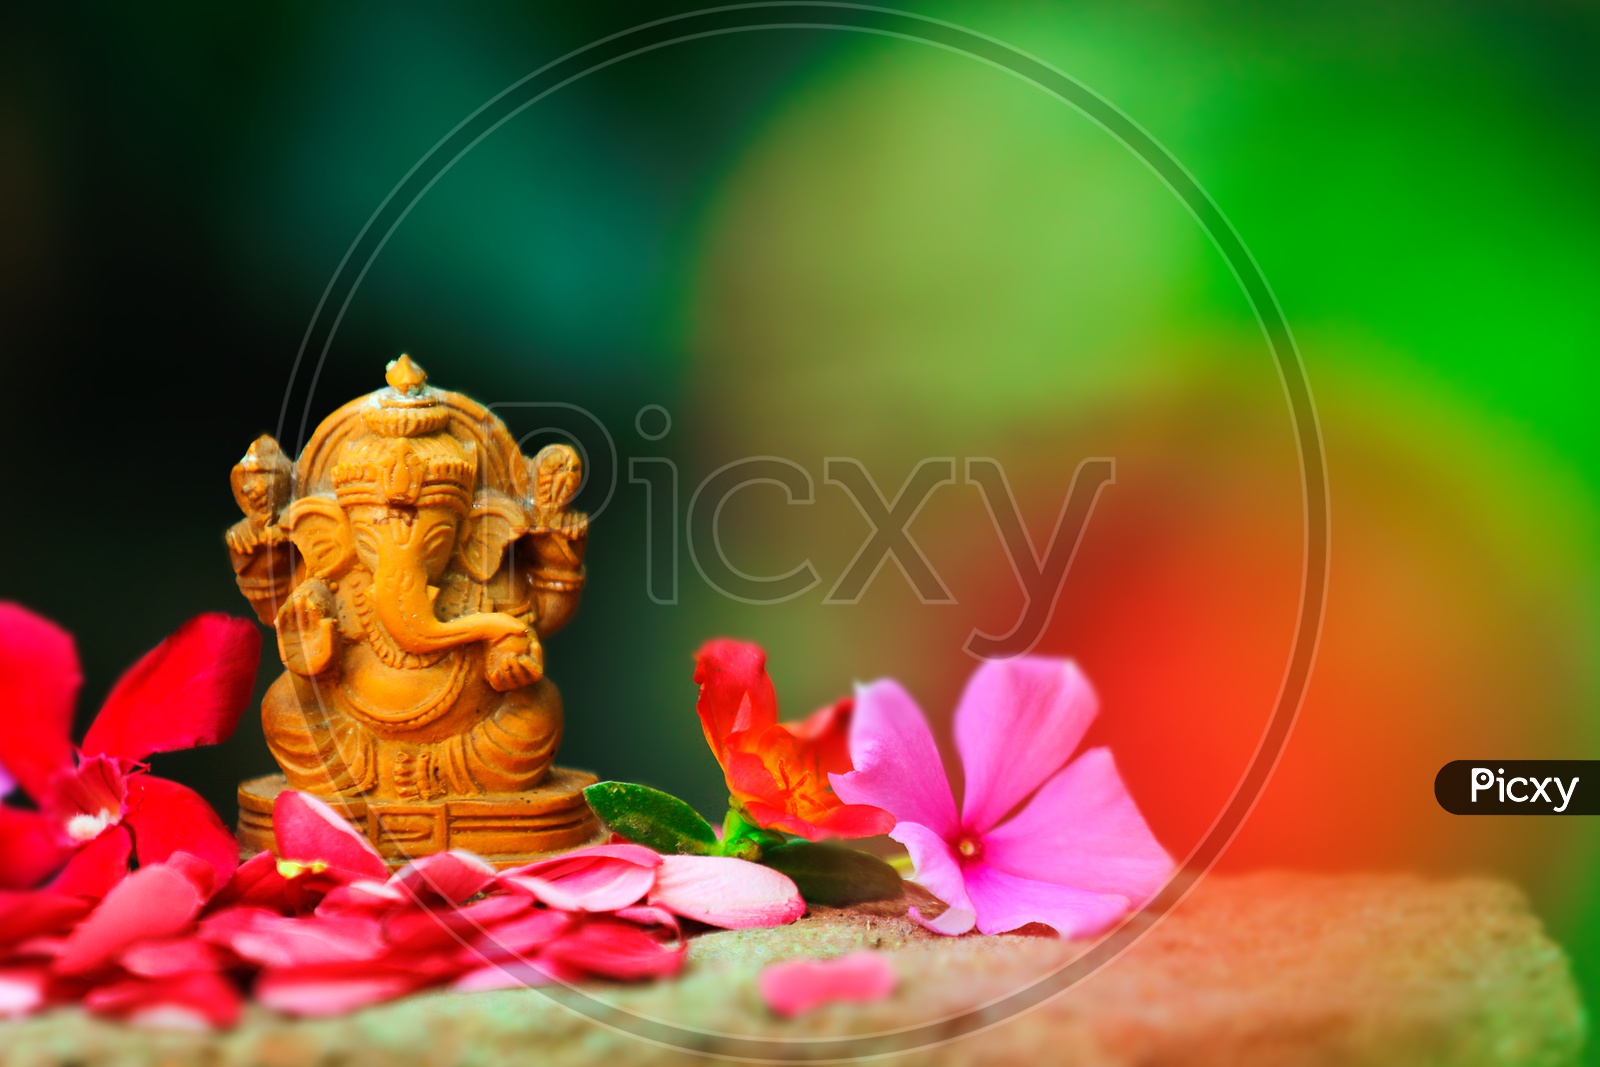 Ganesh Idol with  beautiful flowers in the foreground